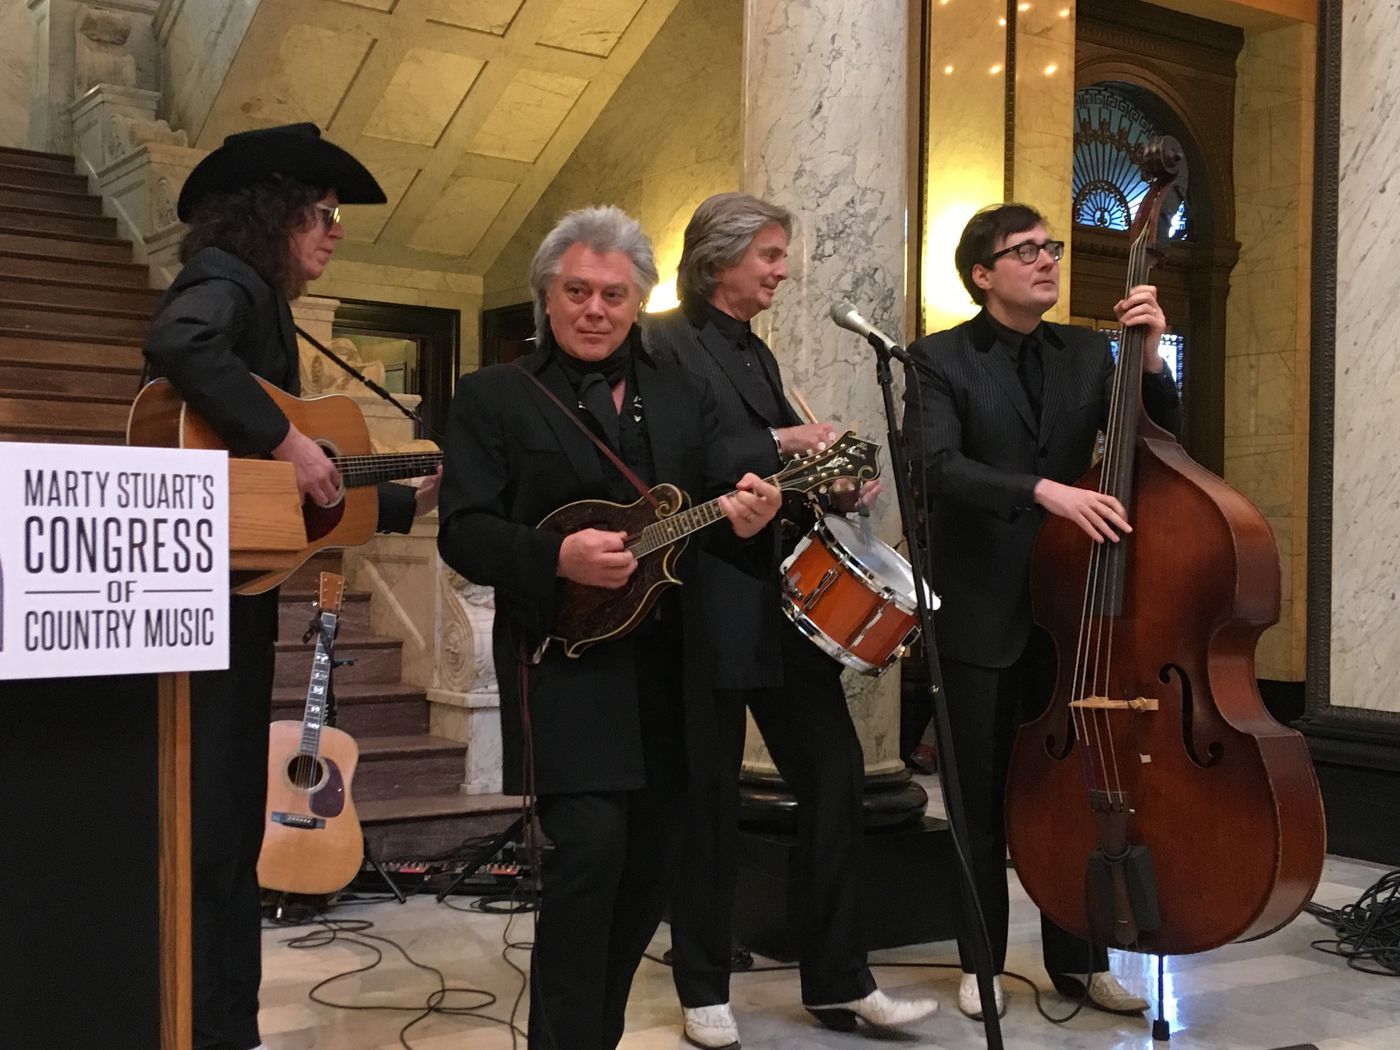 Country singer Marty Stuart, second from left, performs at the Mississippi Capitol with members of his band, The Fabulous Superlatives, on Wednesday, Jan. 31, 2018. Band members are Kenny Vaughan, left, Harry Stinson, second from right, and Chris Scruggs. Stuart says he is planning to develop a museum called Marty Stuart's Congress of Country Music in his hometown of Philadelphia, Miss. ( AP Photo/Emily Wagster Pettus)